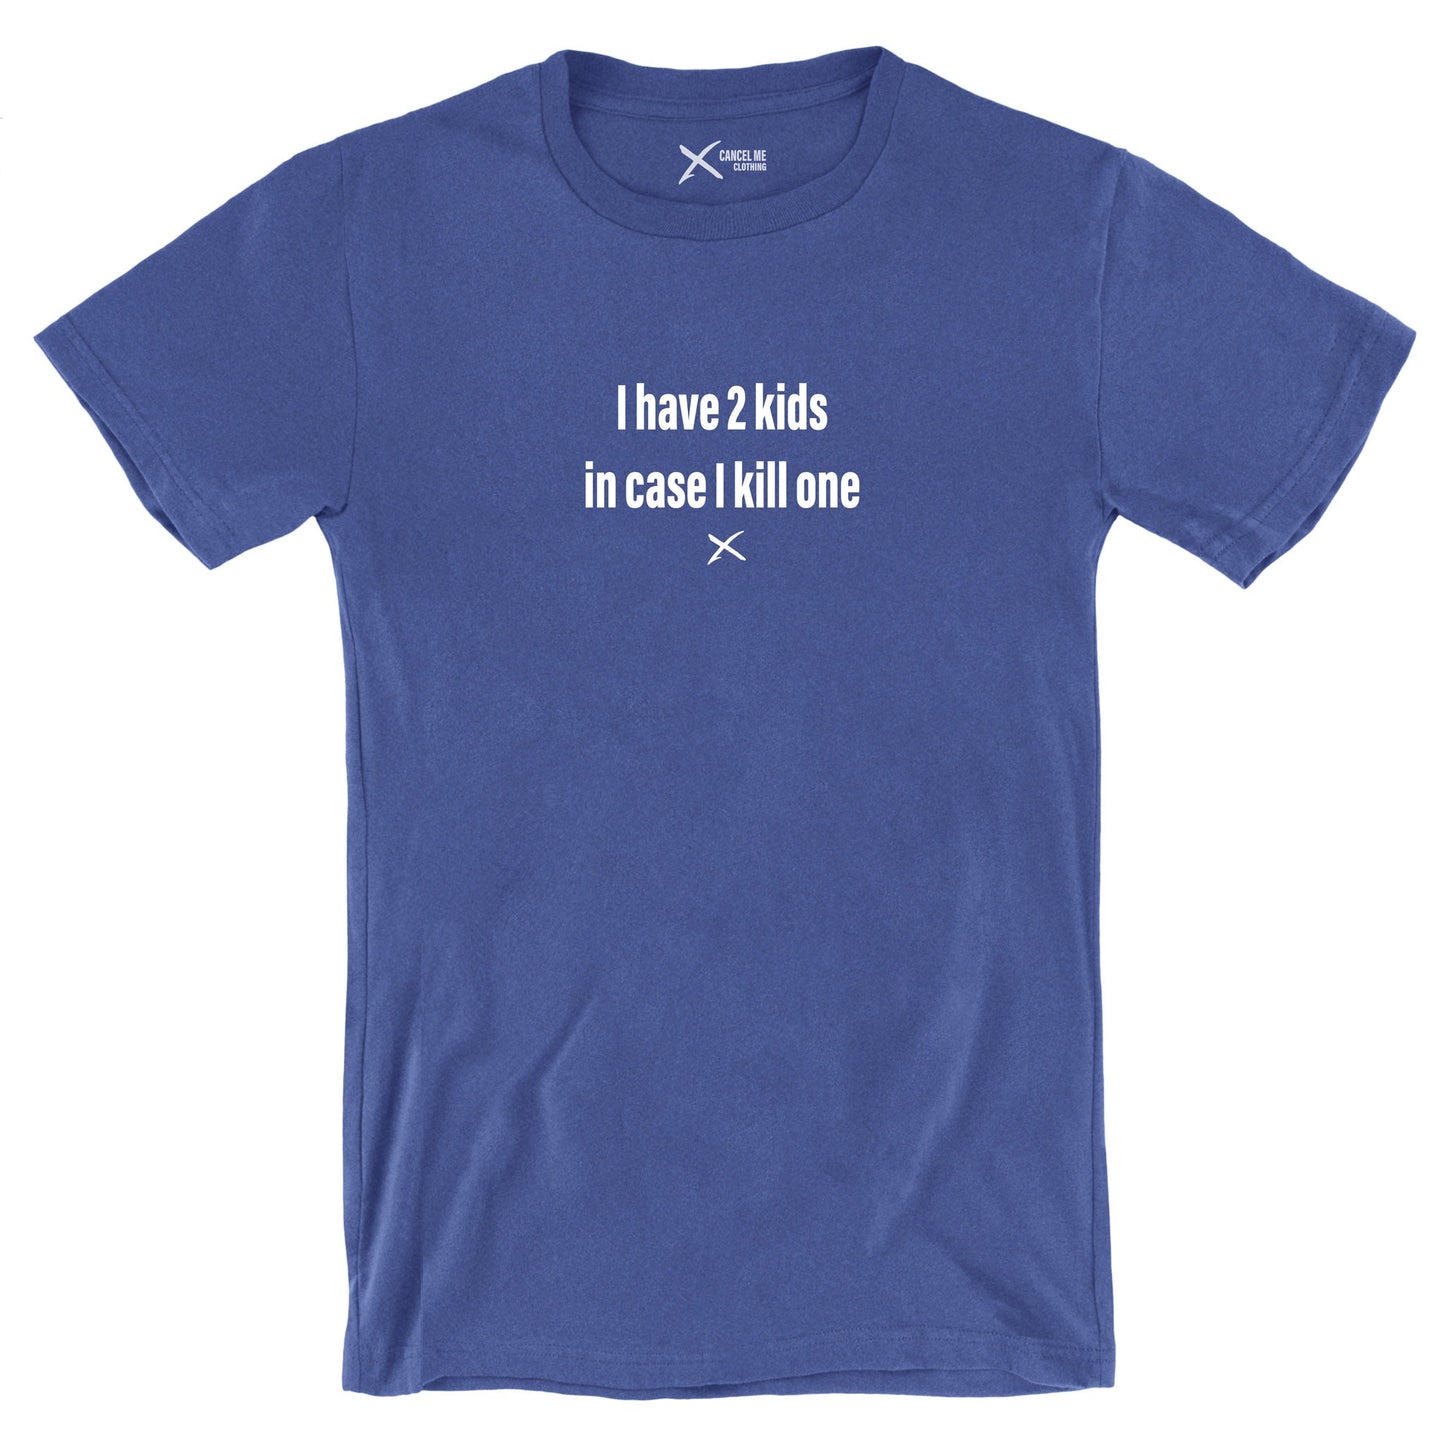 I have 2 kids in case I kill one - Shirt